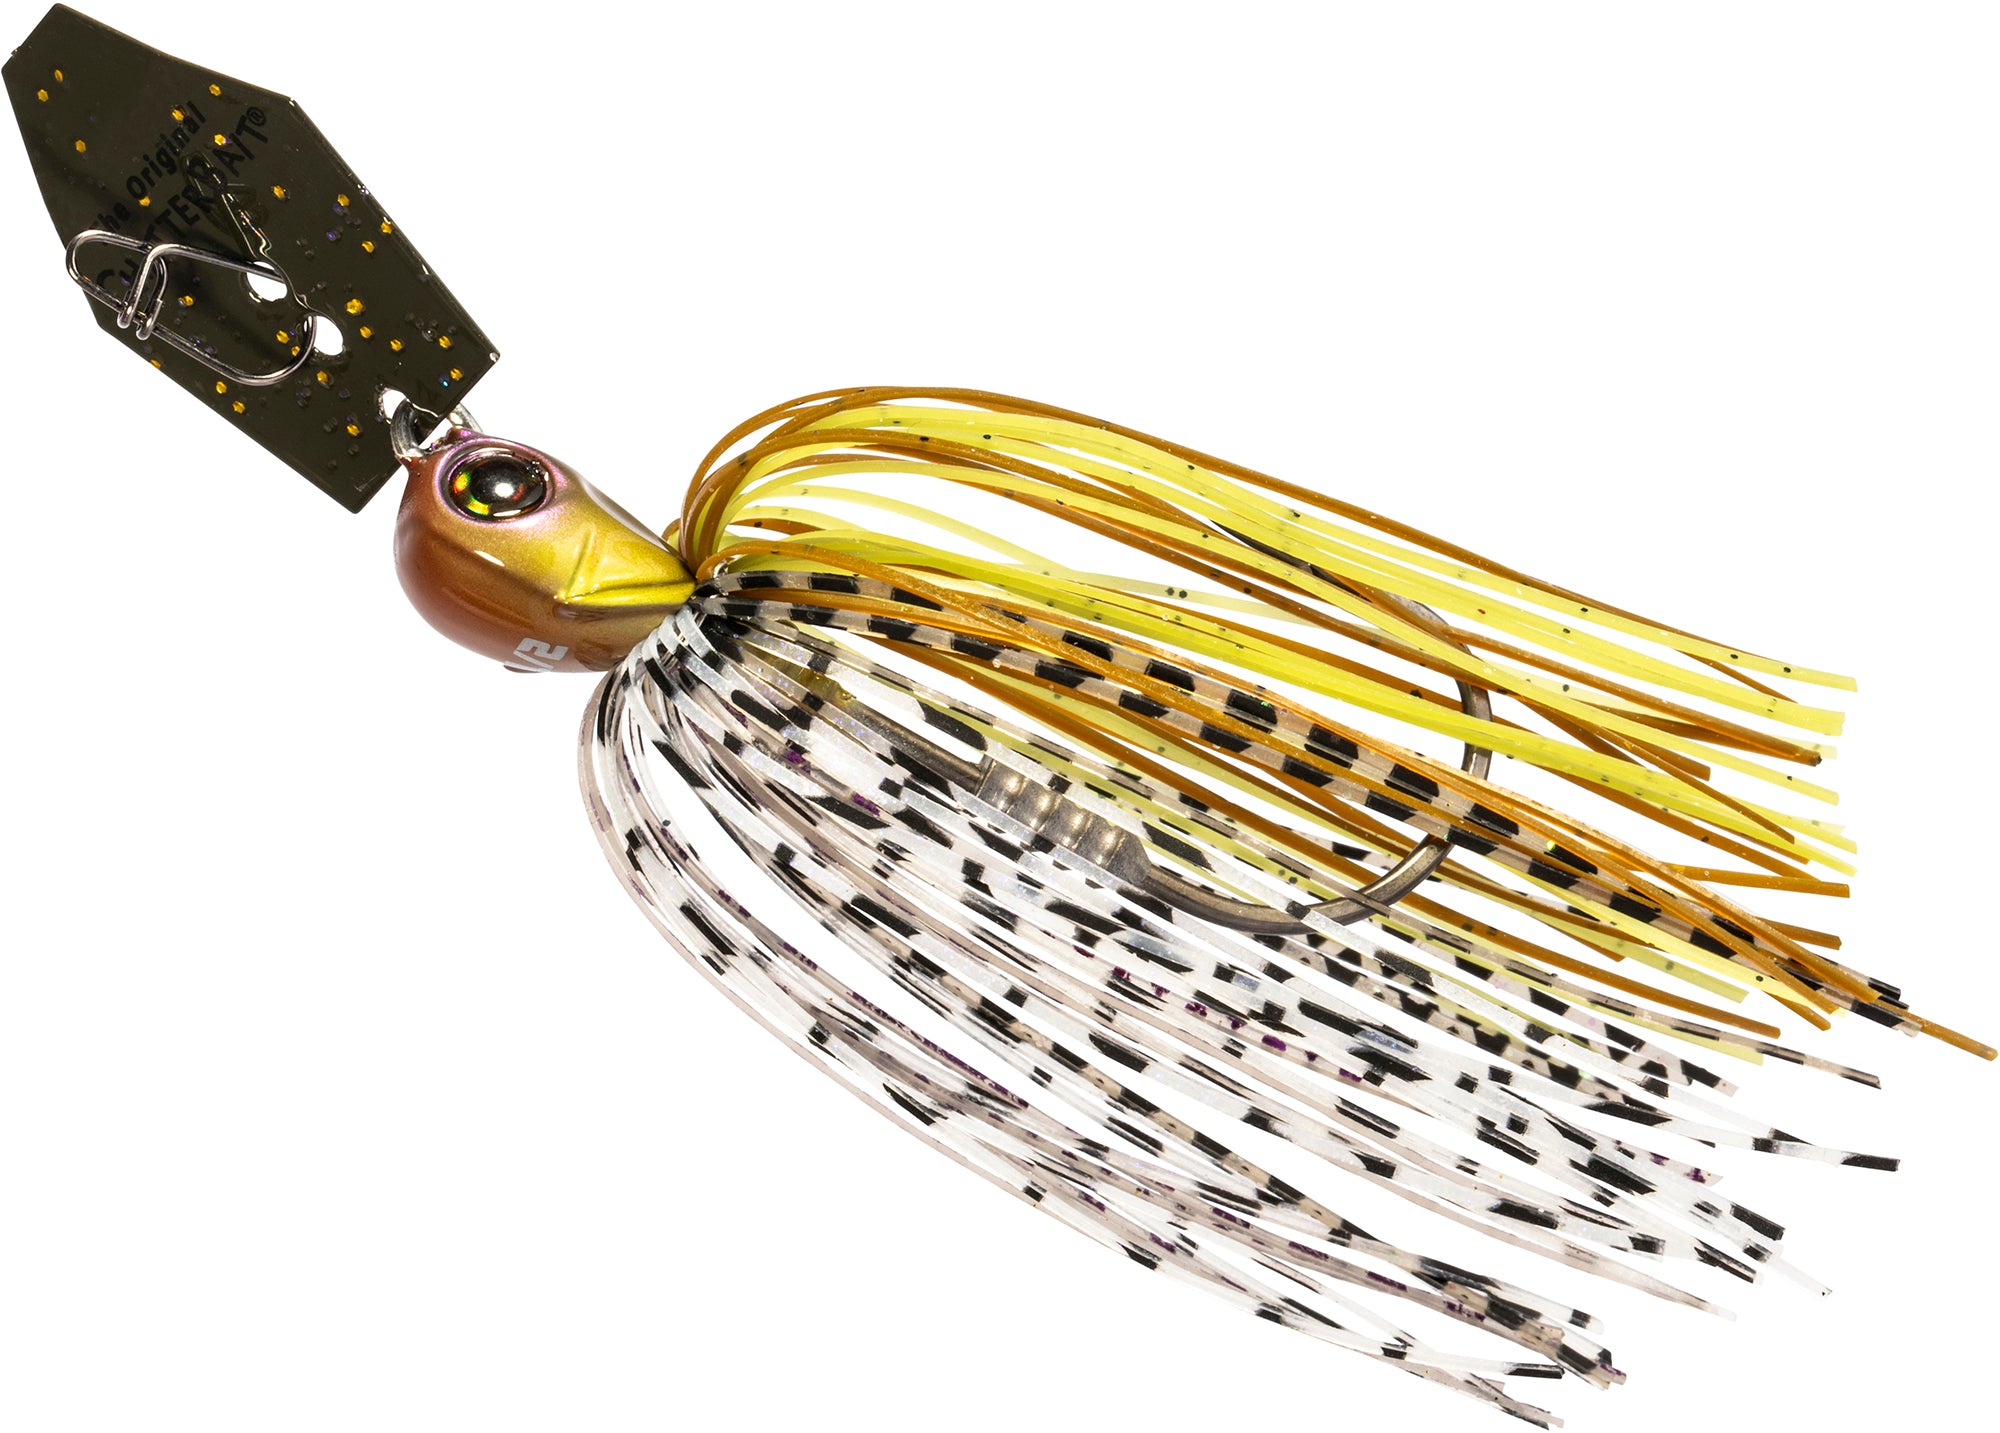 Lures - Z-MAN - Flies/Jigs - Page 1 - Tackle Haven